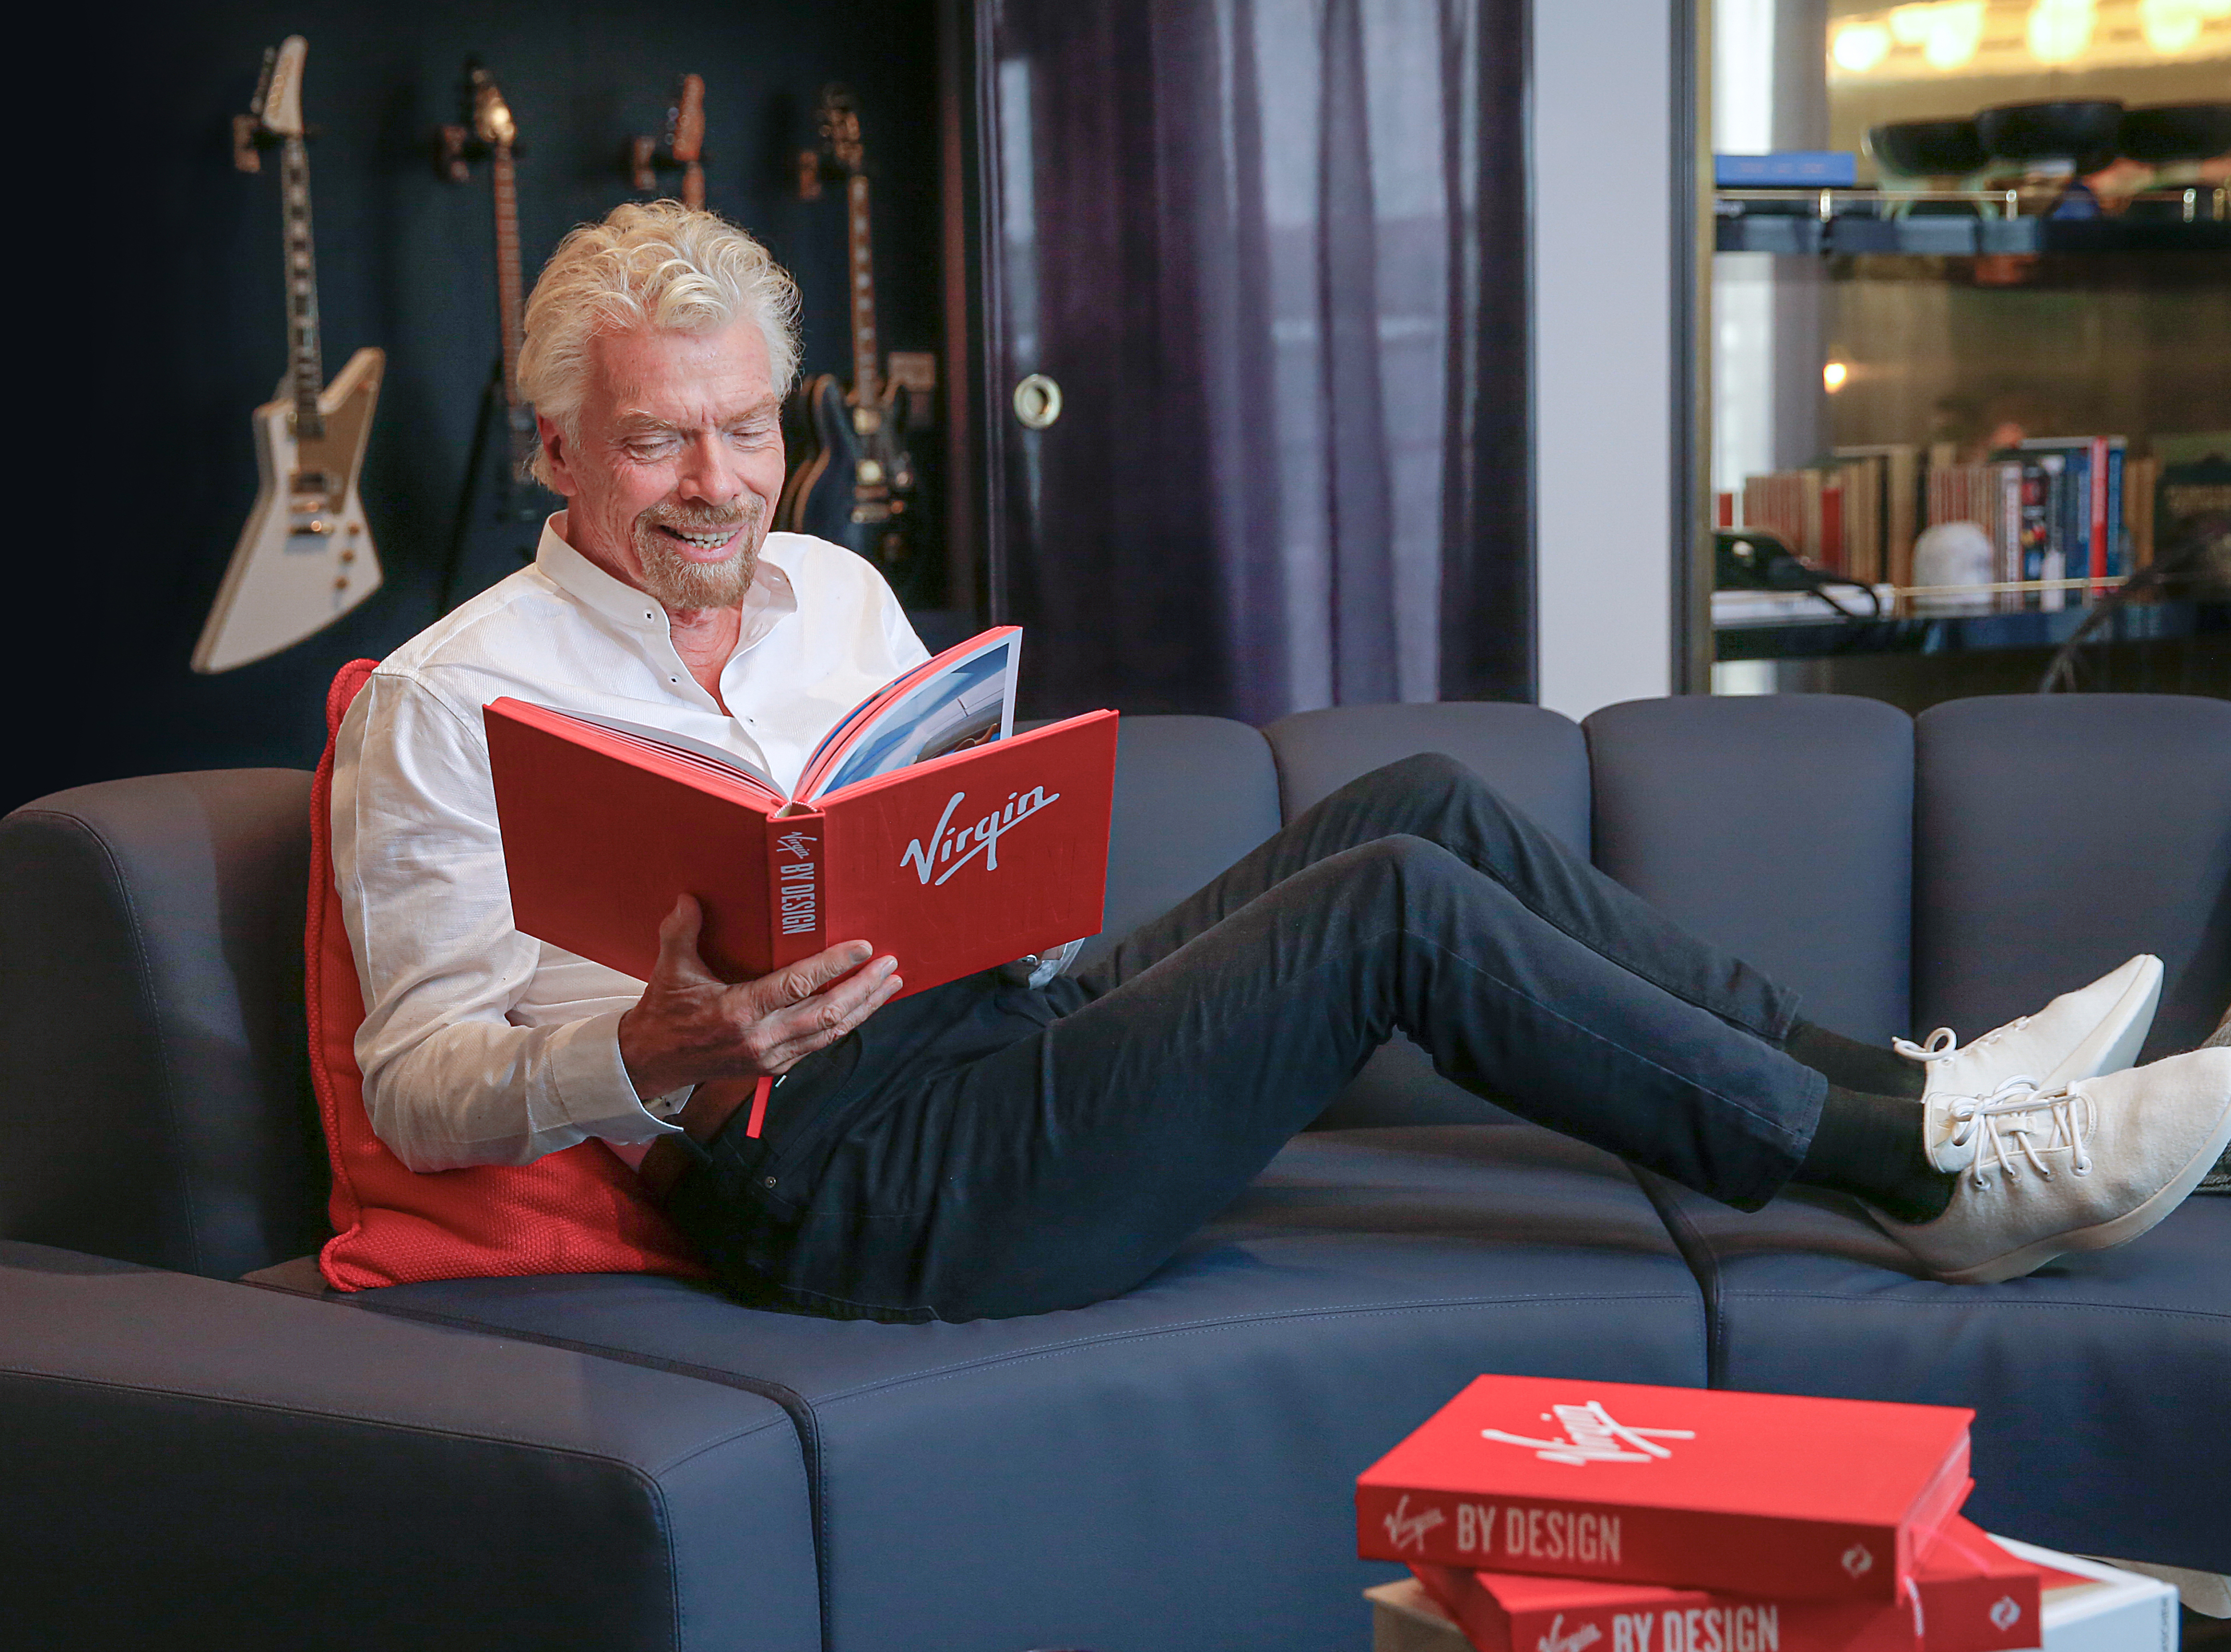 Richard Branson relaxes on a sofa reading a copy of Virgin By Design